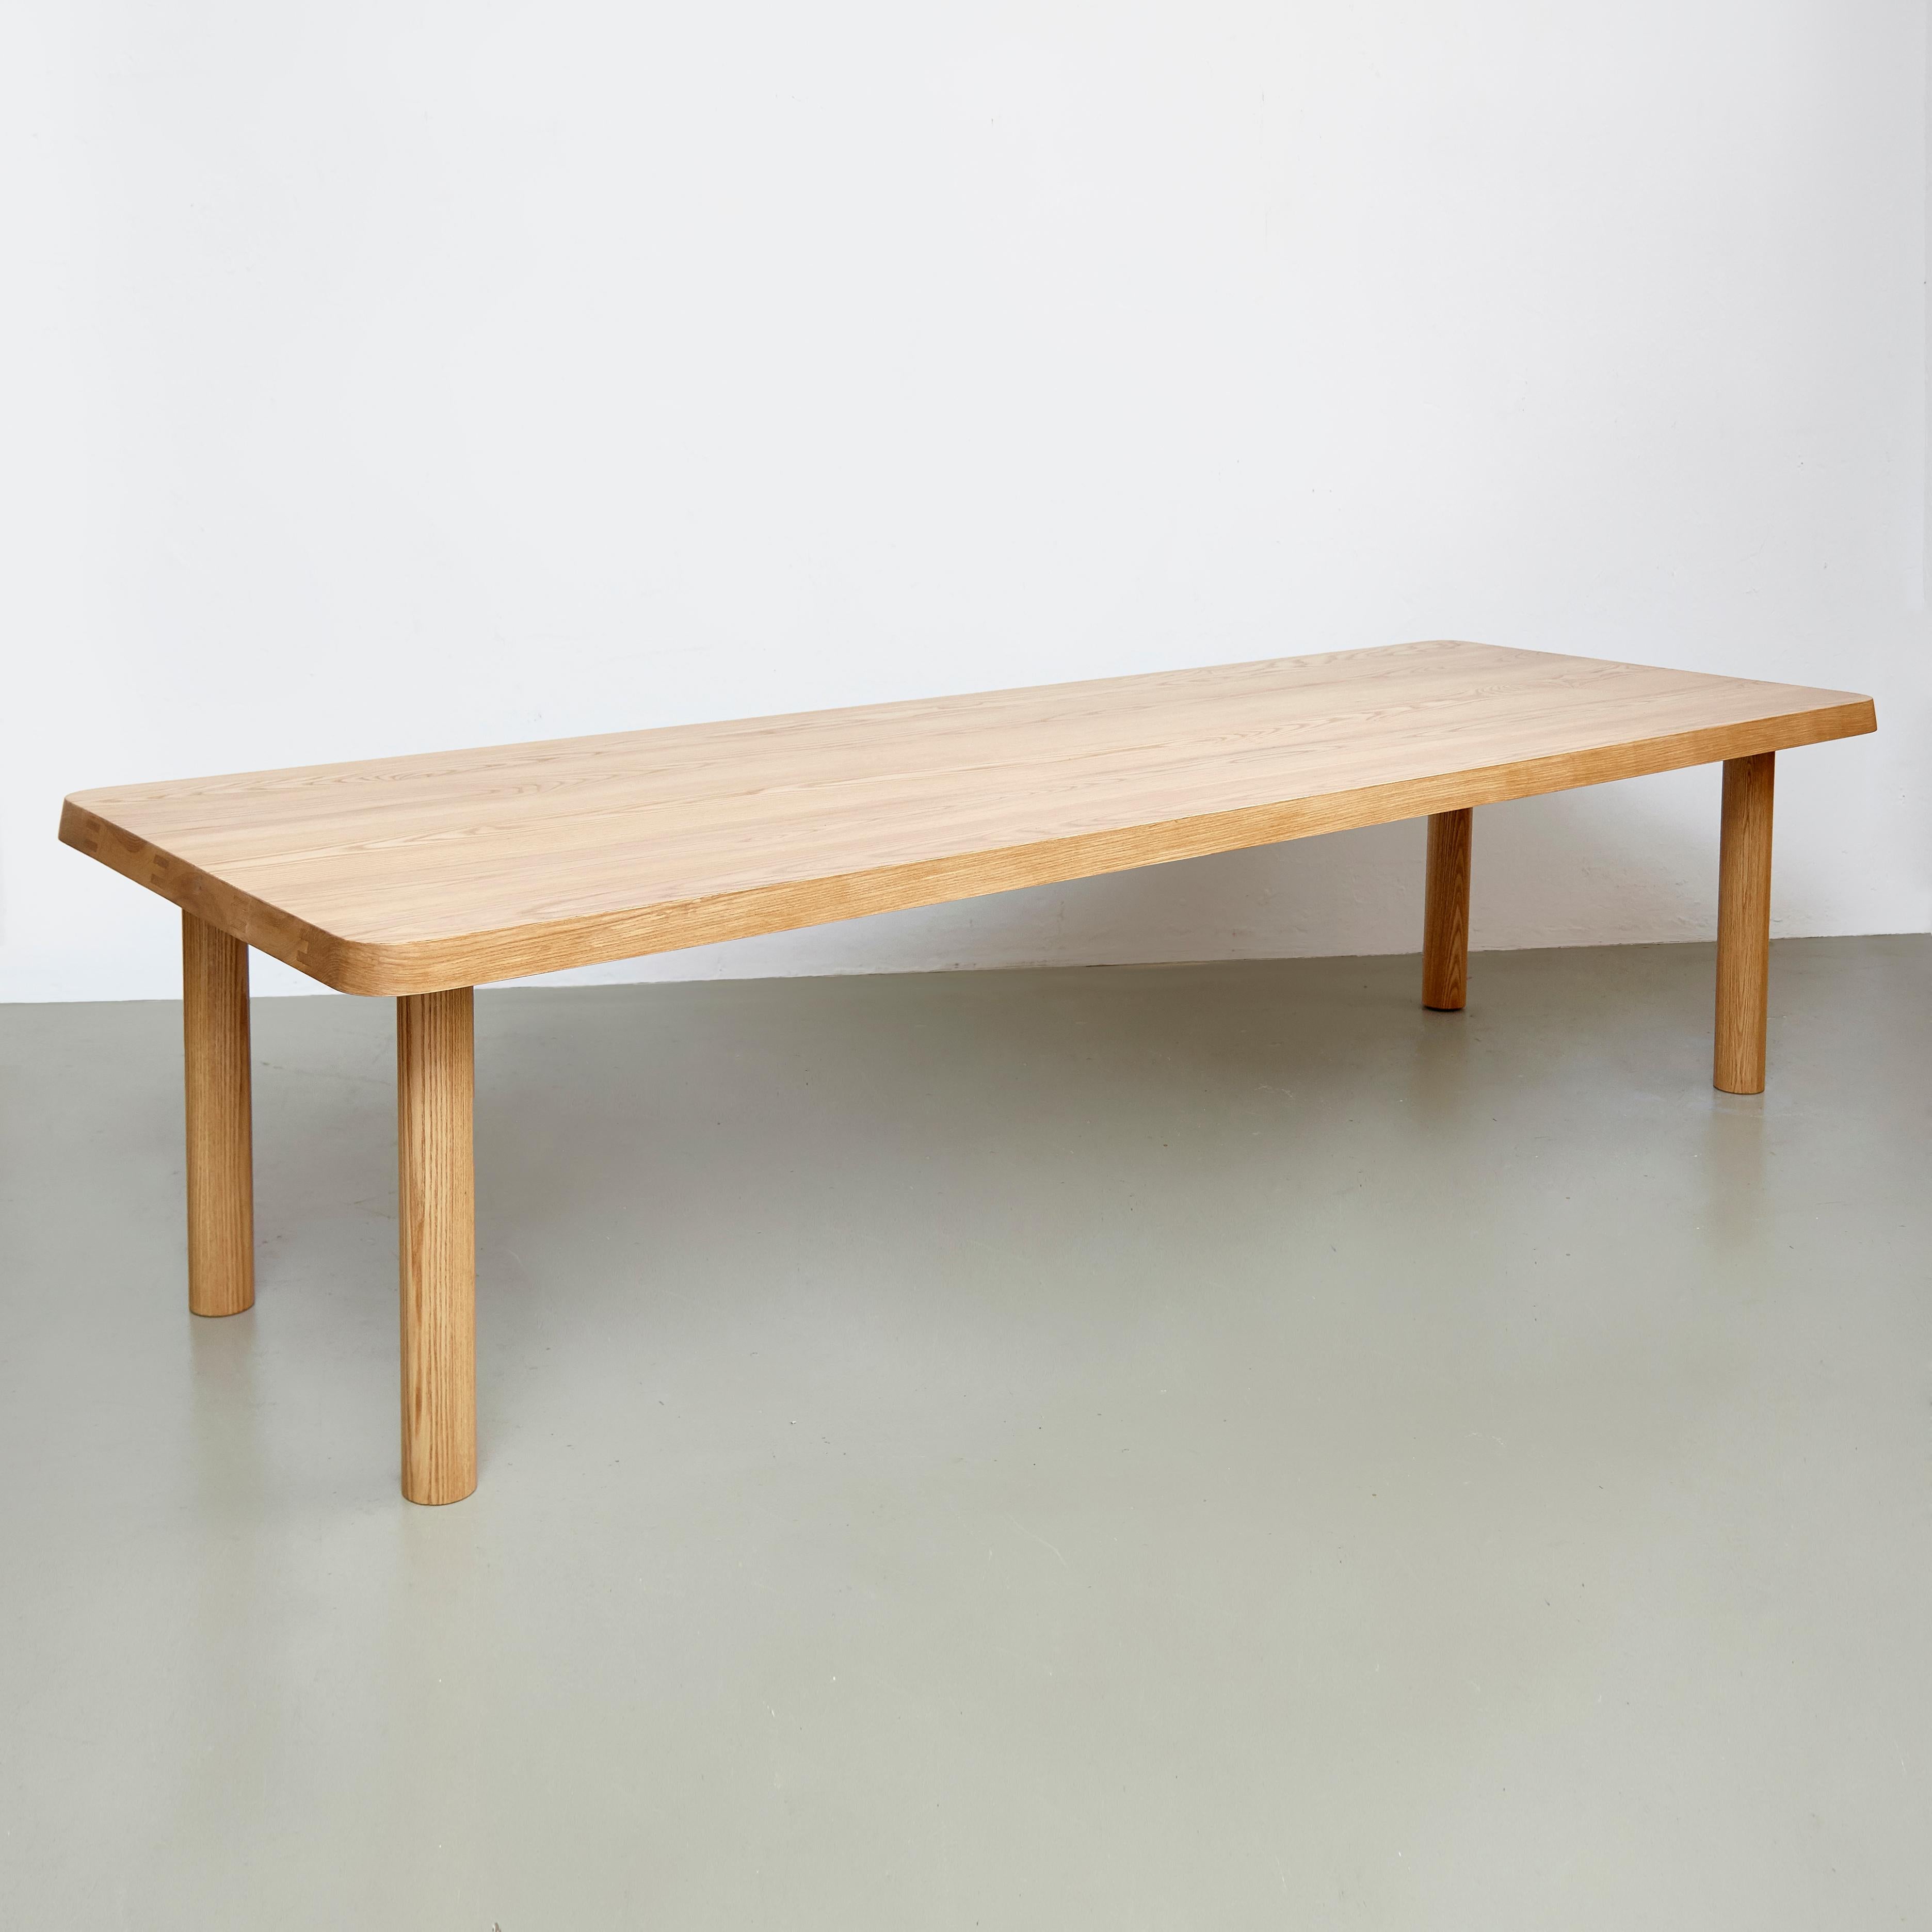 Spanish Dada Est. Contemporary Solid Ash Extra Large Dining Table For Sale